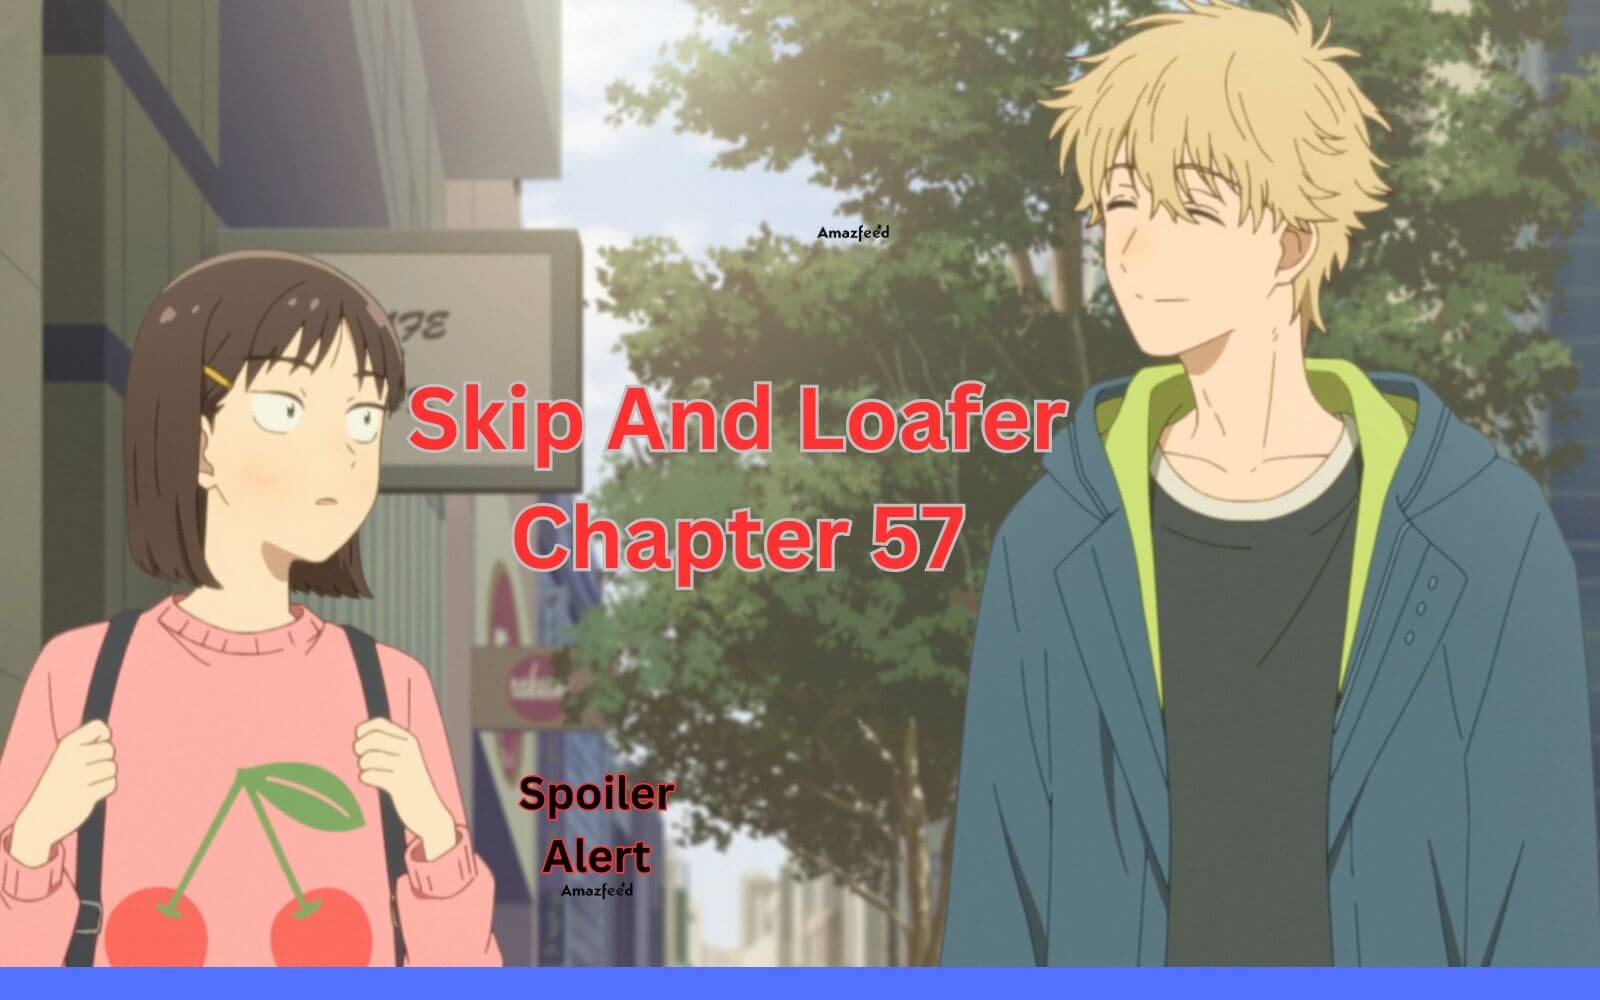 Skip and Loafer chapter 57 release date, time, spoilers, where to